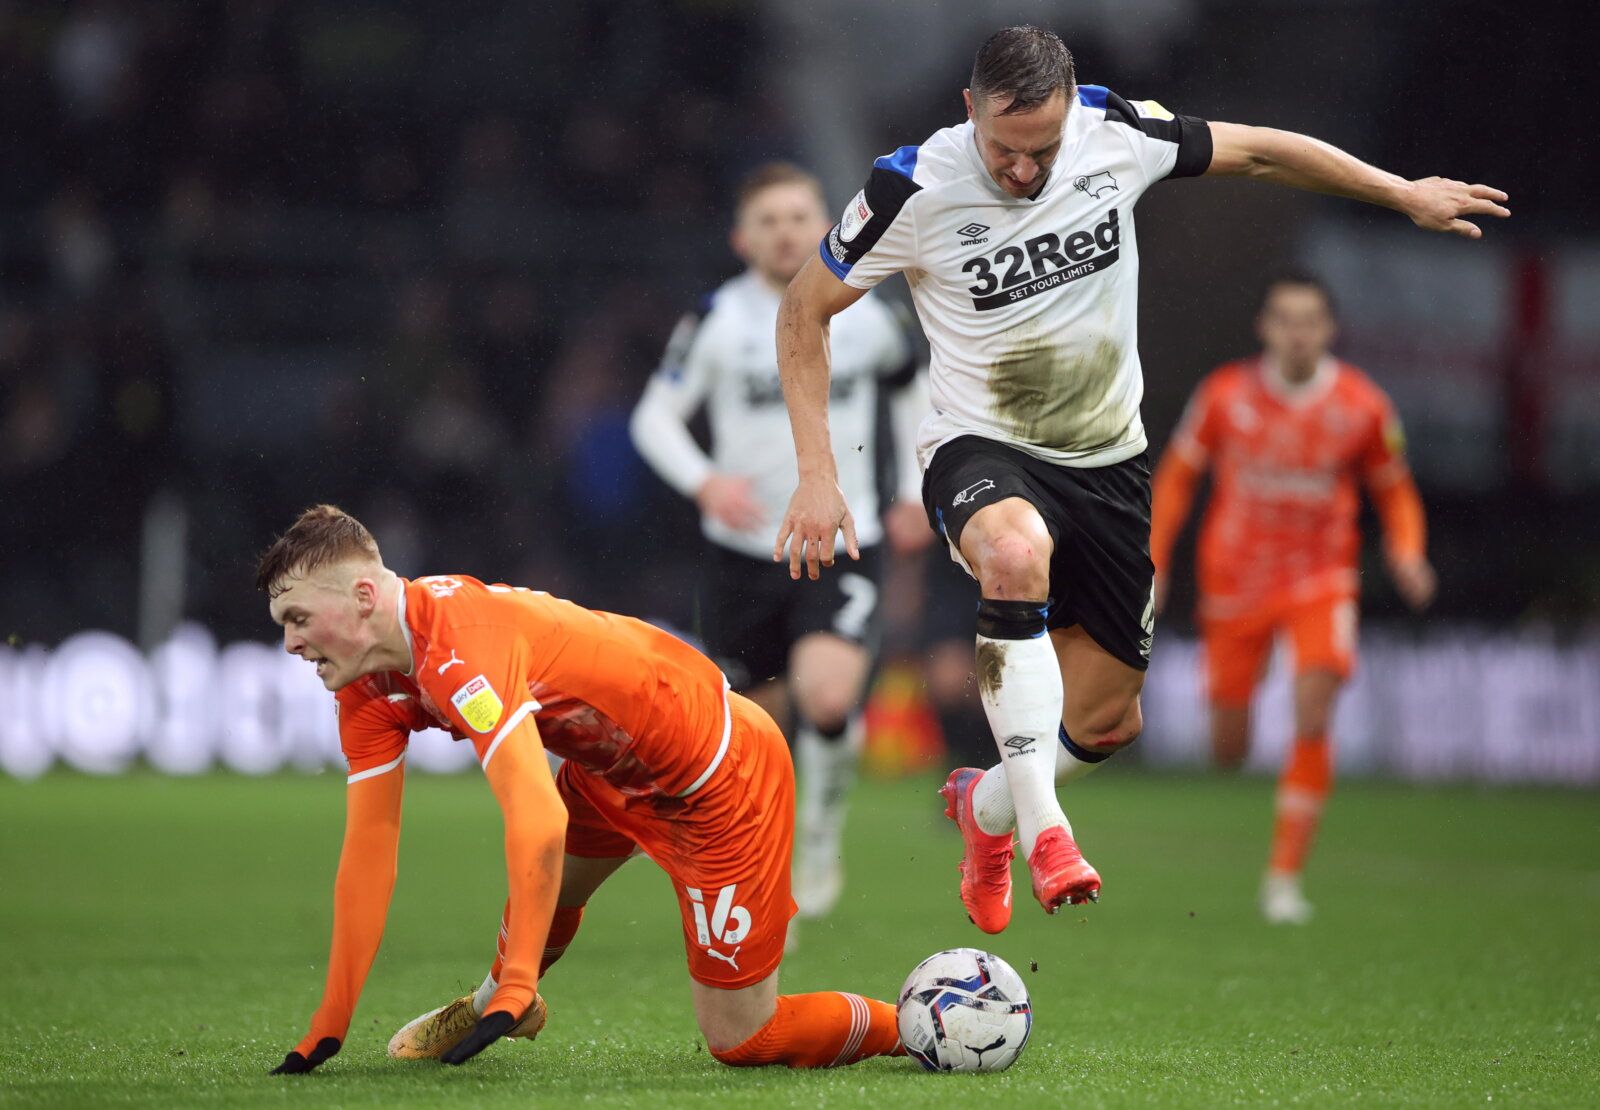 Soccer Football - Championship - Derby County v Blackpool - Pride Park, Derby, Britain - December 11, 2021  Blackpool's Sonny Carey in action with Derby County's Phil Jagielka   Action Images/Molly Darlington  EDITORIAL USE ONLY. No use with unauthorized audio, video, data, fixture lists, club/league logos or 